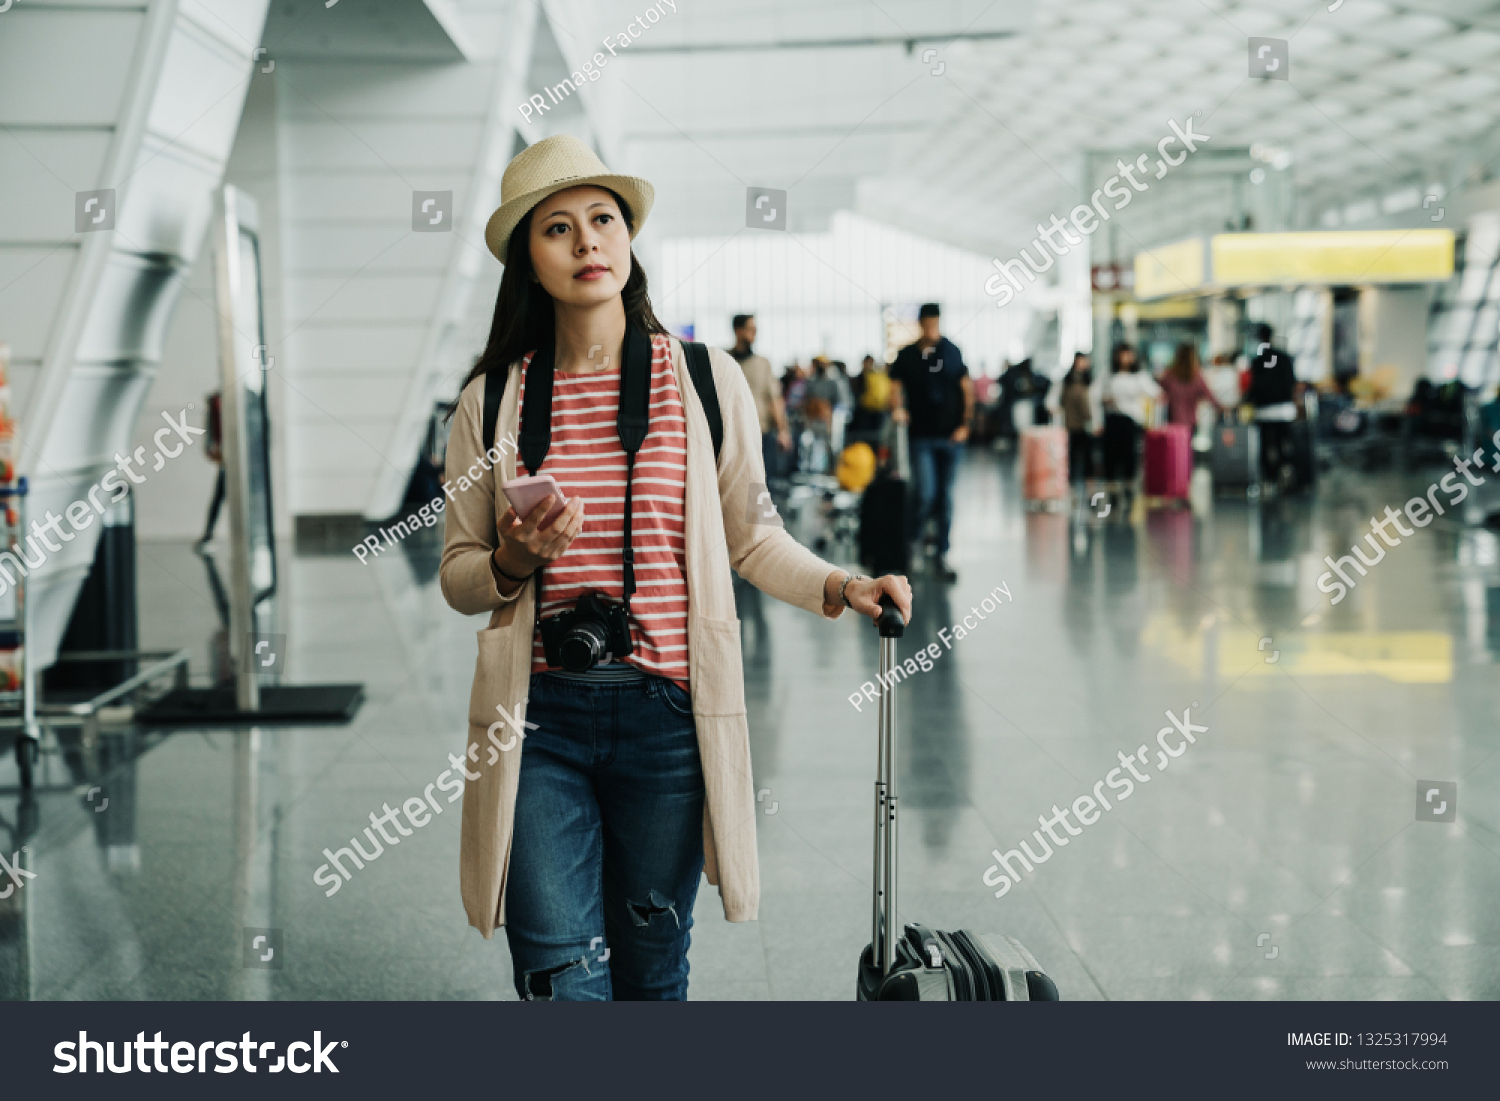 asian girl carrying suitcase pics